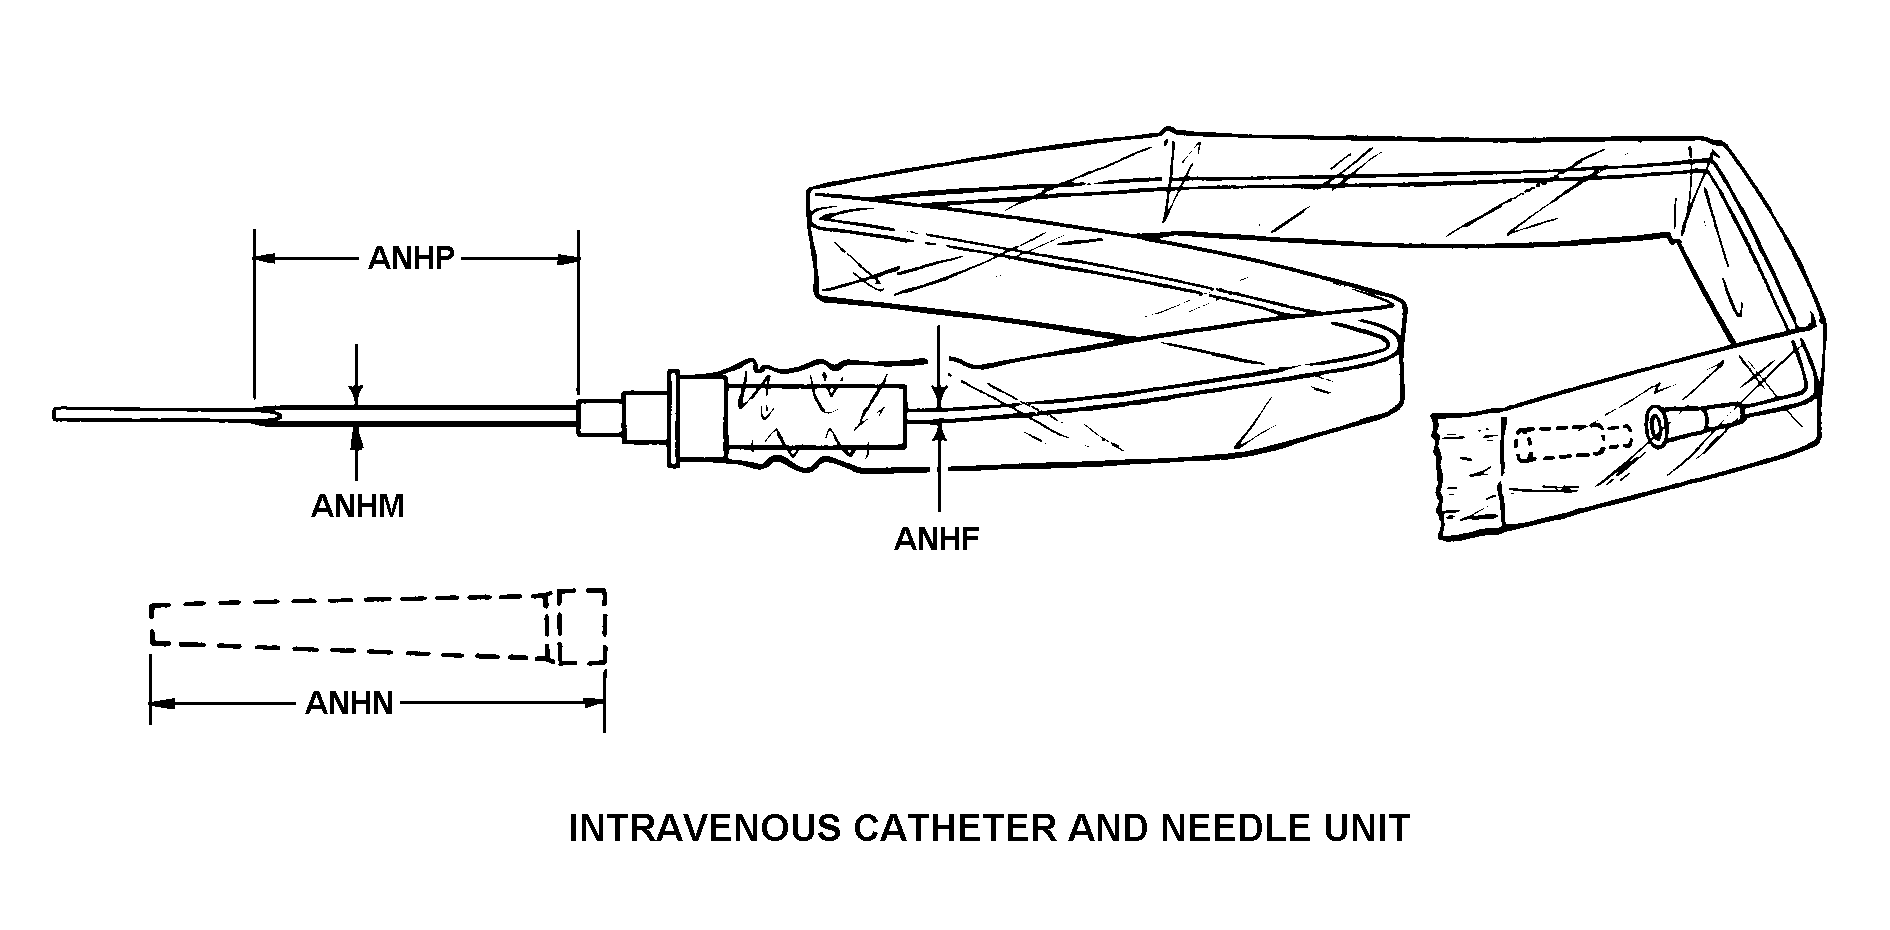 INTRAVENOUS CATHETER AND NEEDLE UNIT style nsn 6515-01-188-0123